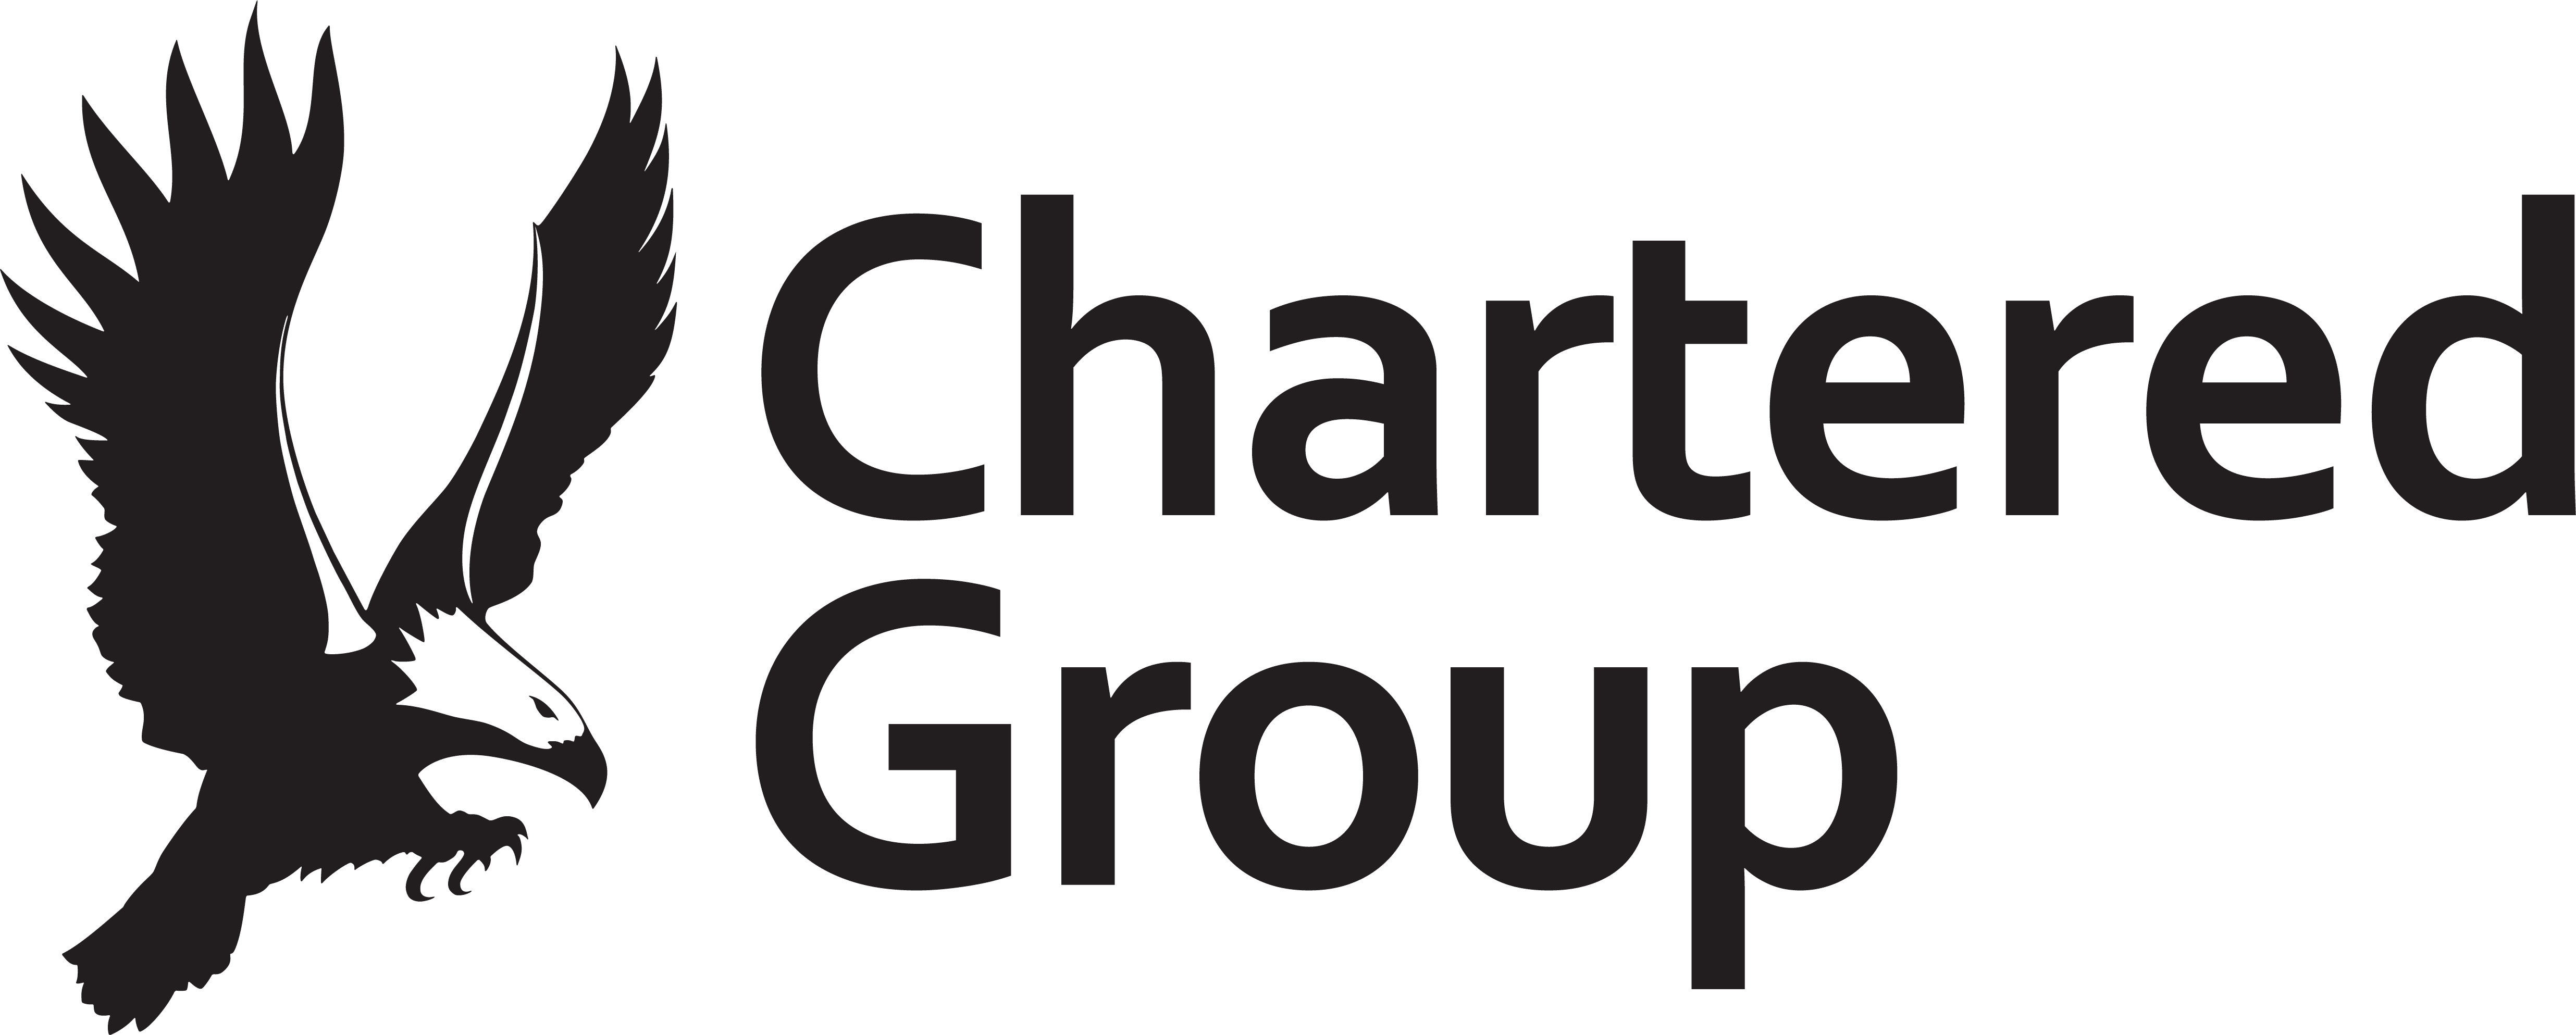 Chartered Group